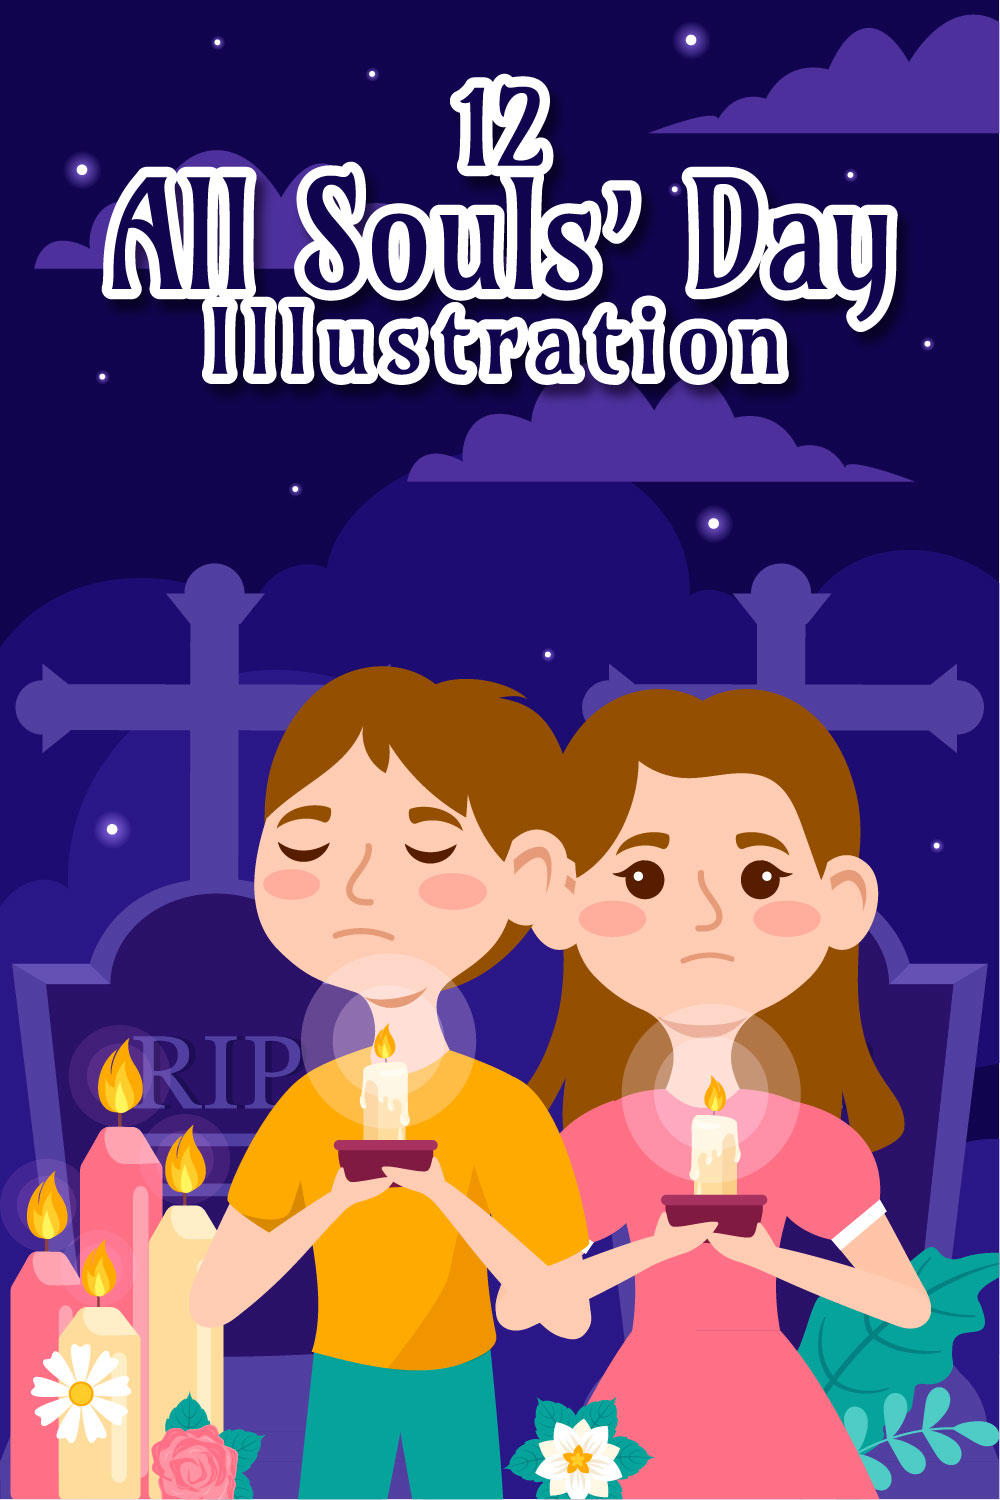 12 All Souls Day Vector Illustration pinterest preview image.